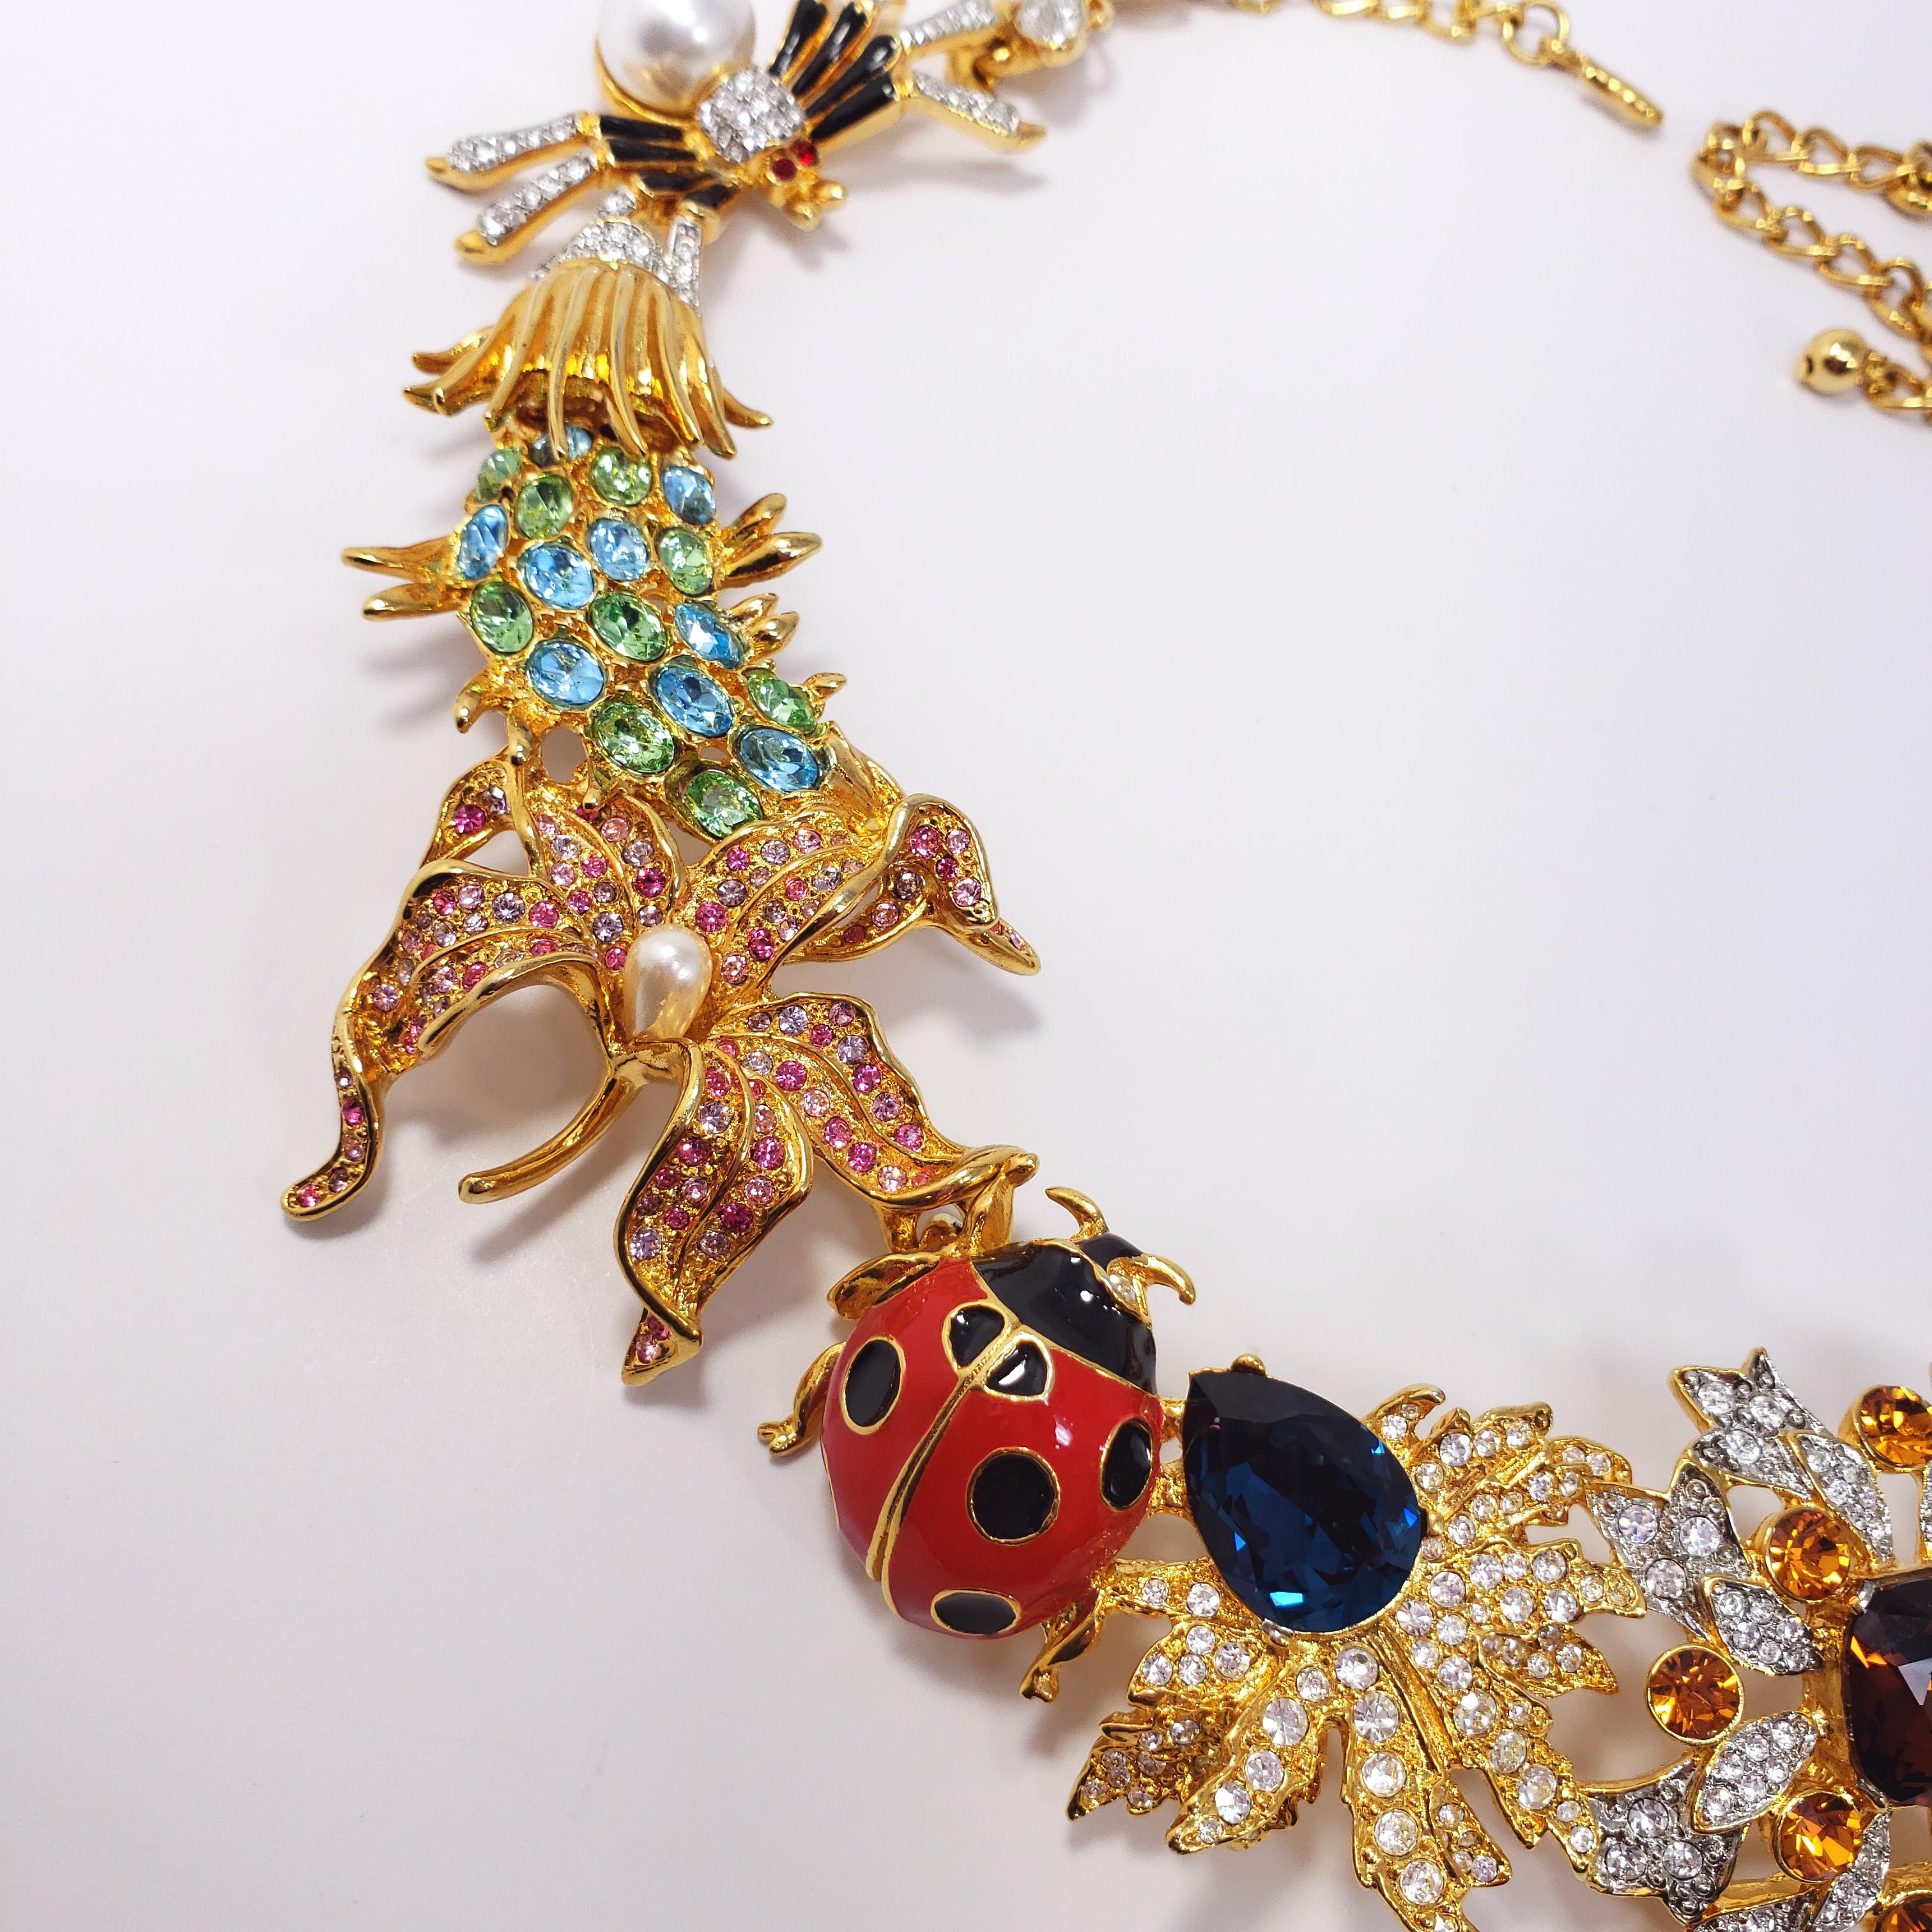 Kenneth Jay Lane Ornate Colorful Crystal Kaleidoscope Collar Necklace in Gold 1